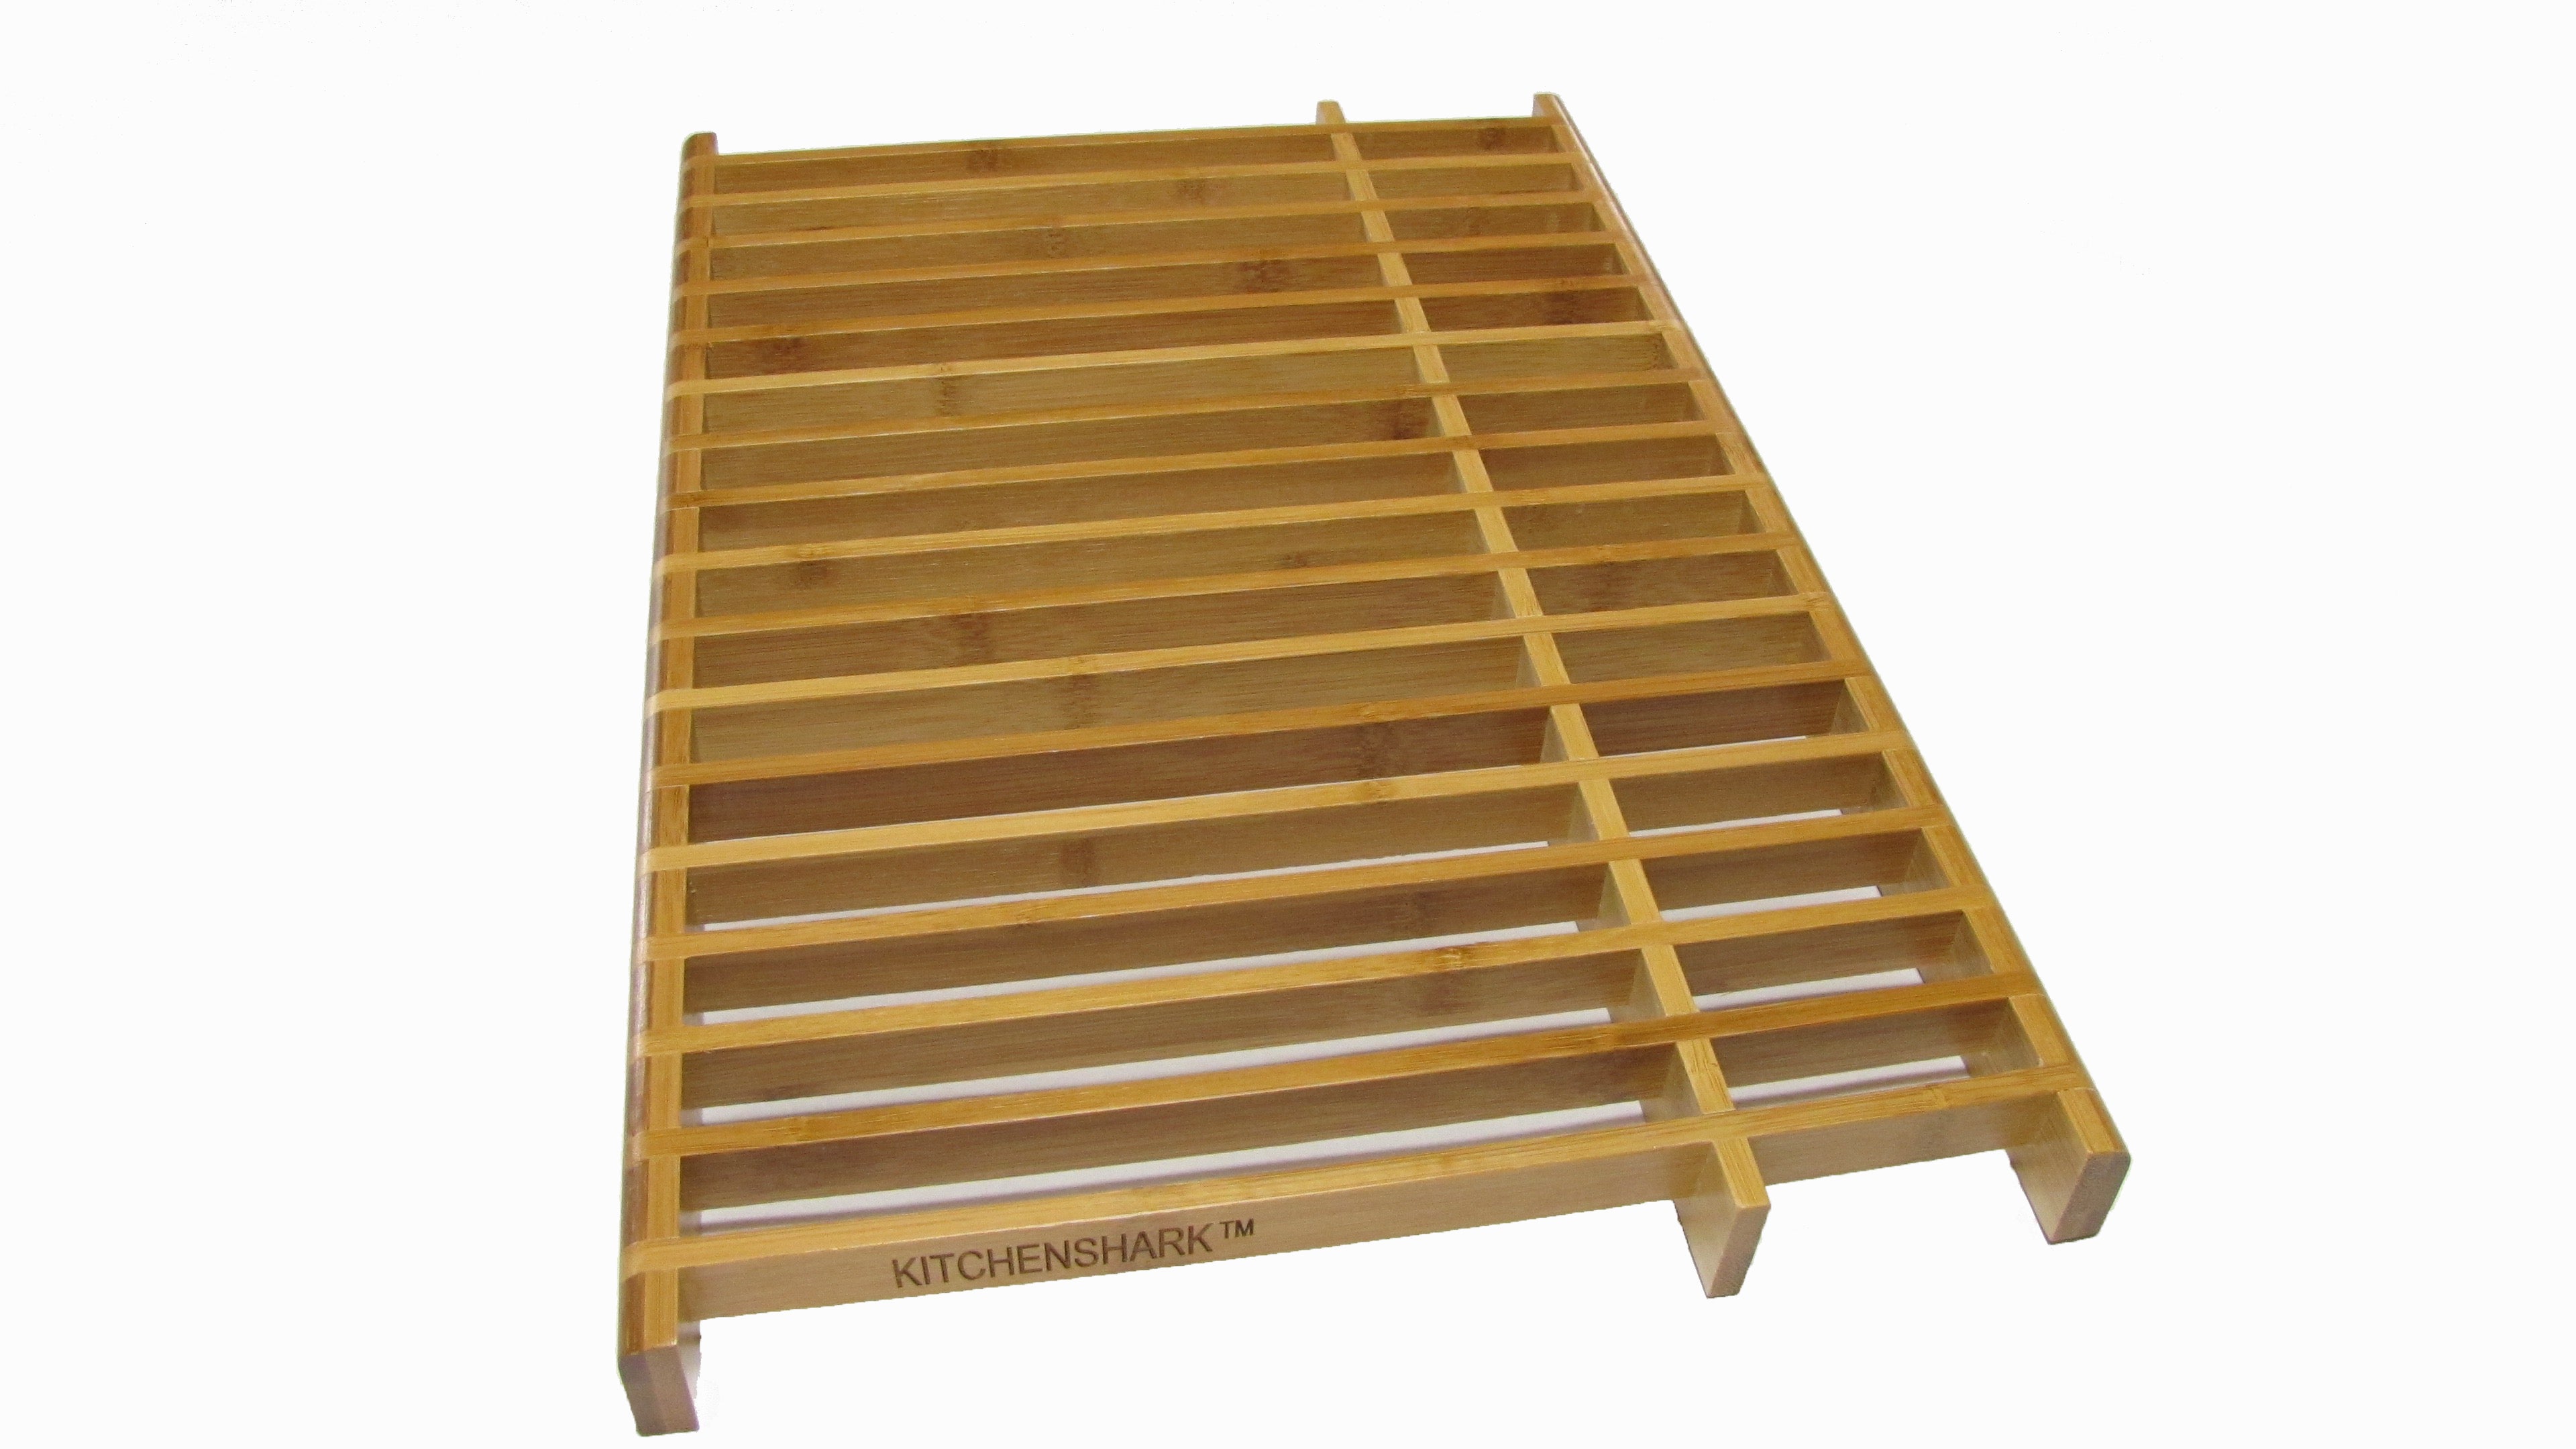 Bamboo Dish Drying Rack - ONLINE ONLY: SUNY Erie - City Campus